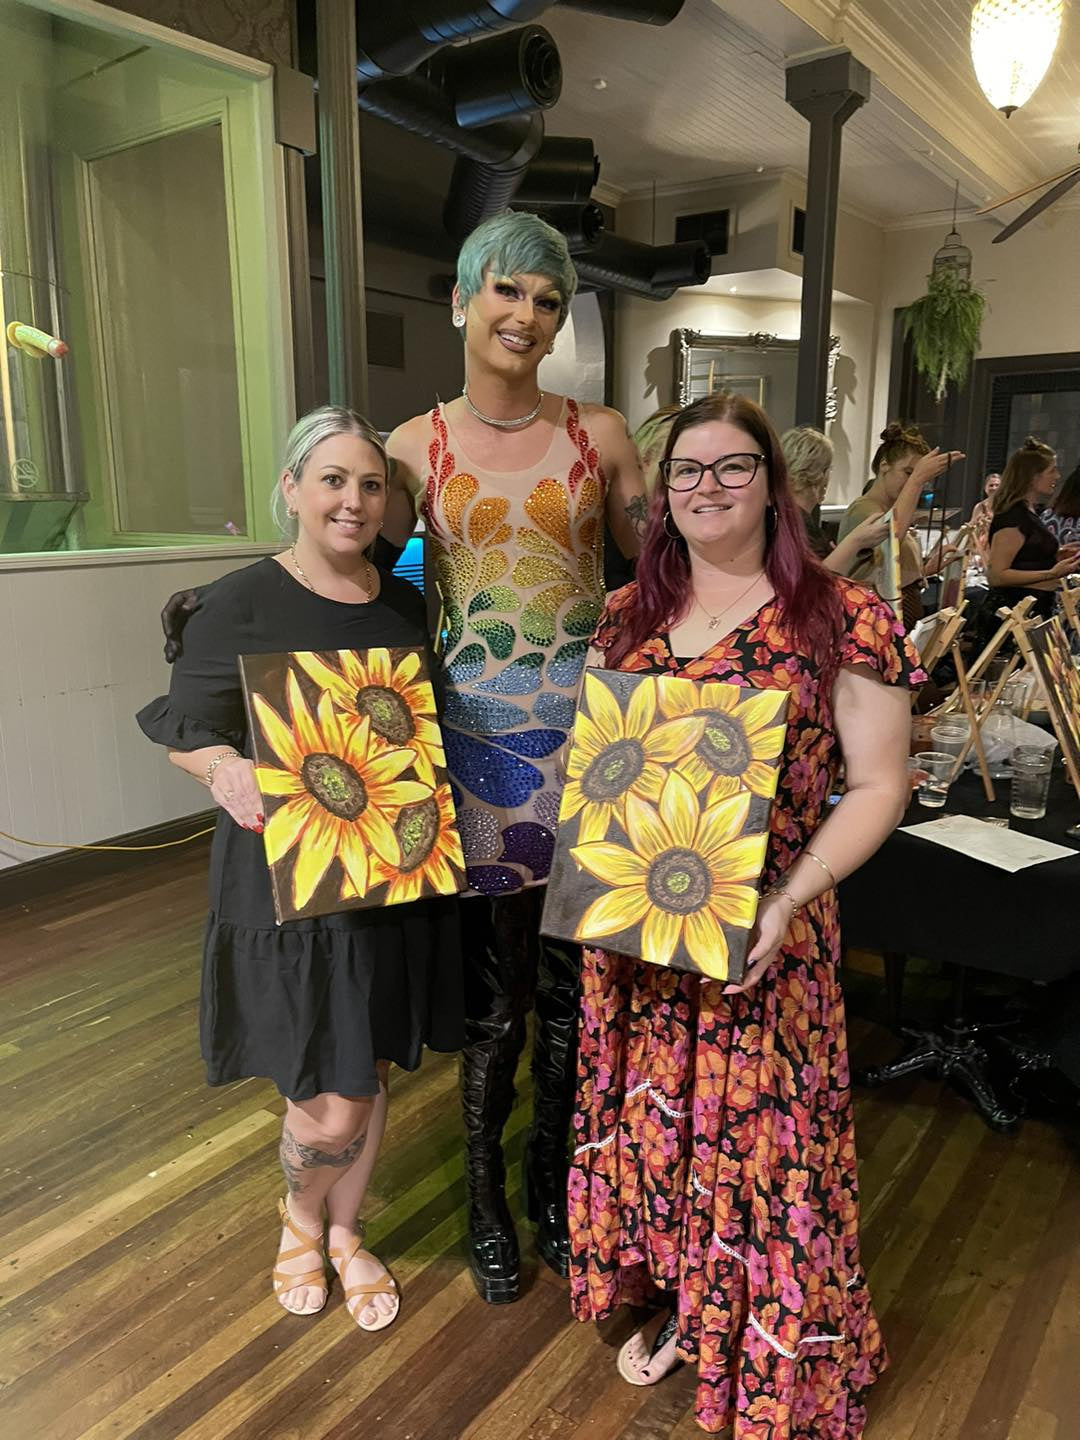 Townsville's Terrific Paint and Sip Party-Paint Juicy - Paint and Sip